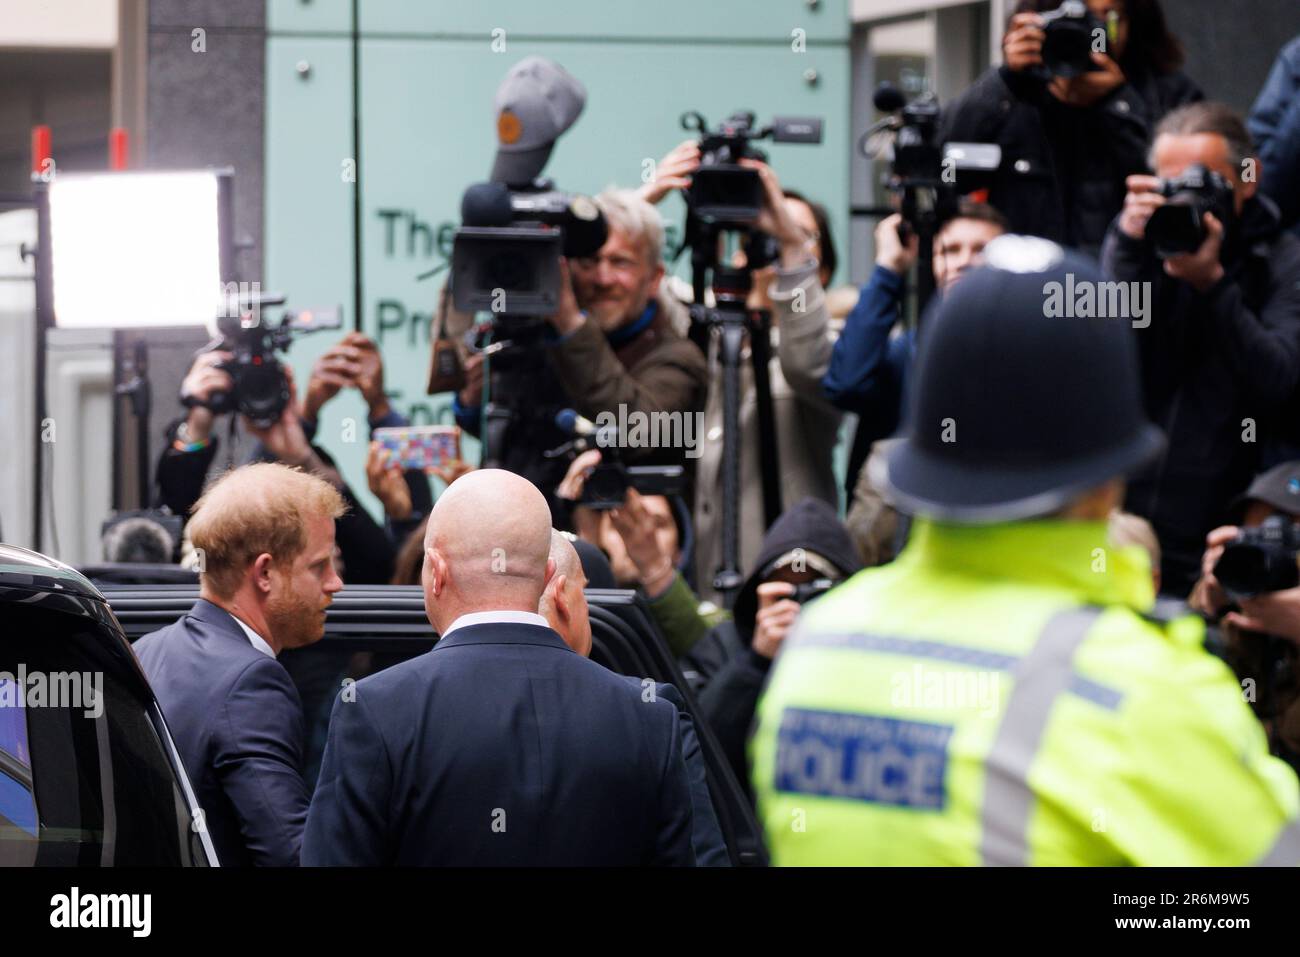 Prince Harry arrives at the High Court this morning ahead of the third day of trial against Mirror Group Newspapers.   Image shot on 7th June 2023.  © Stock Photo